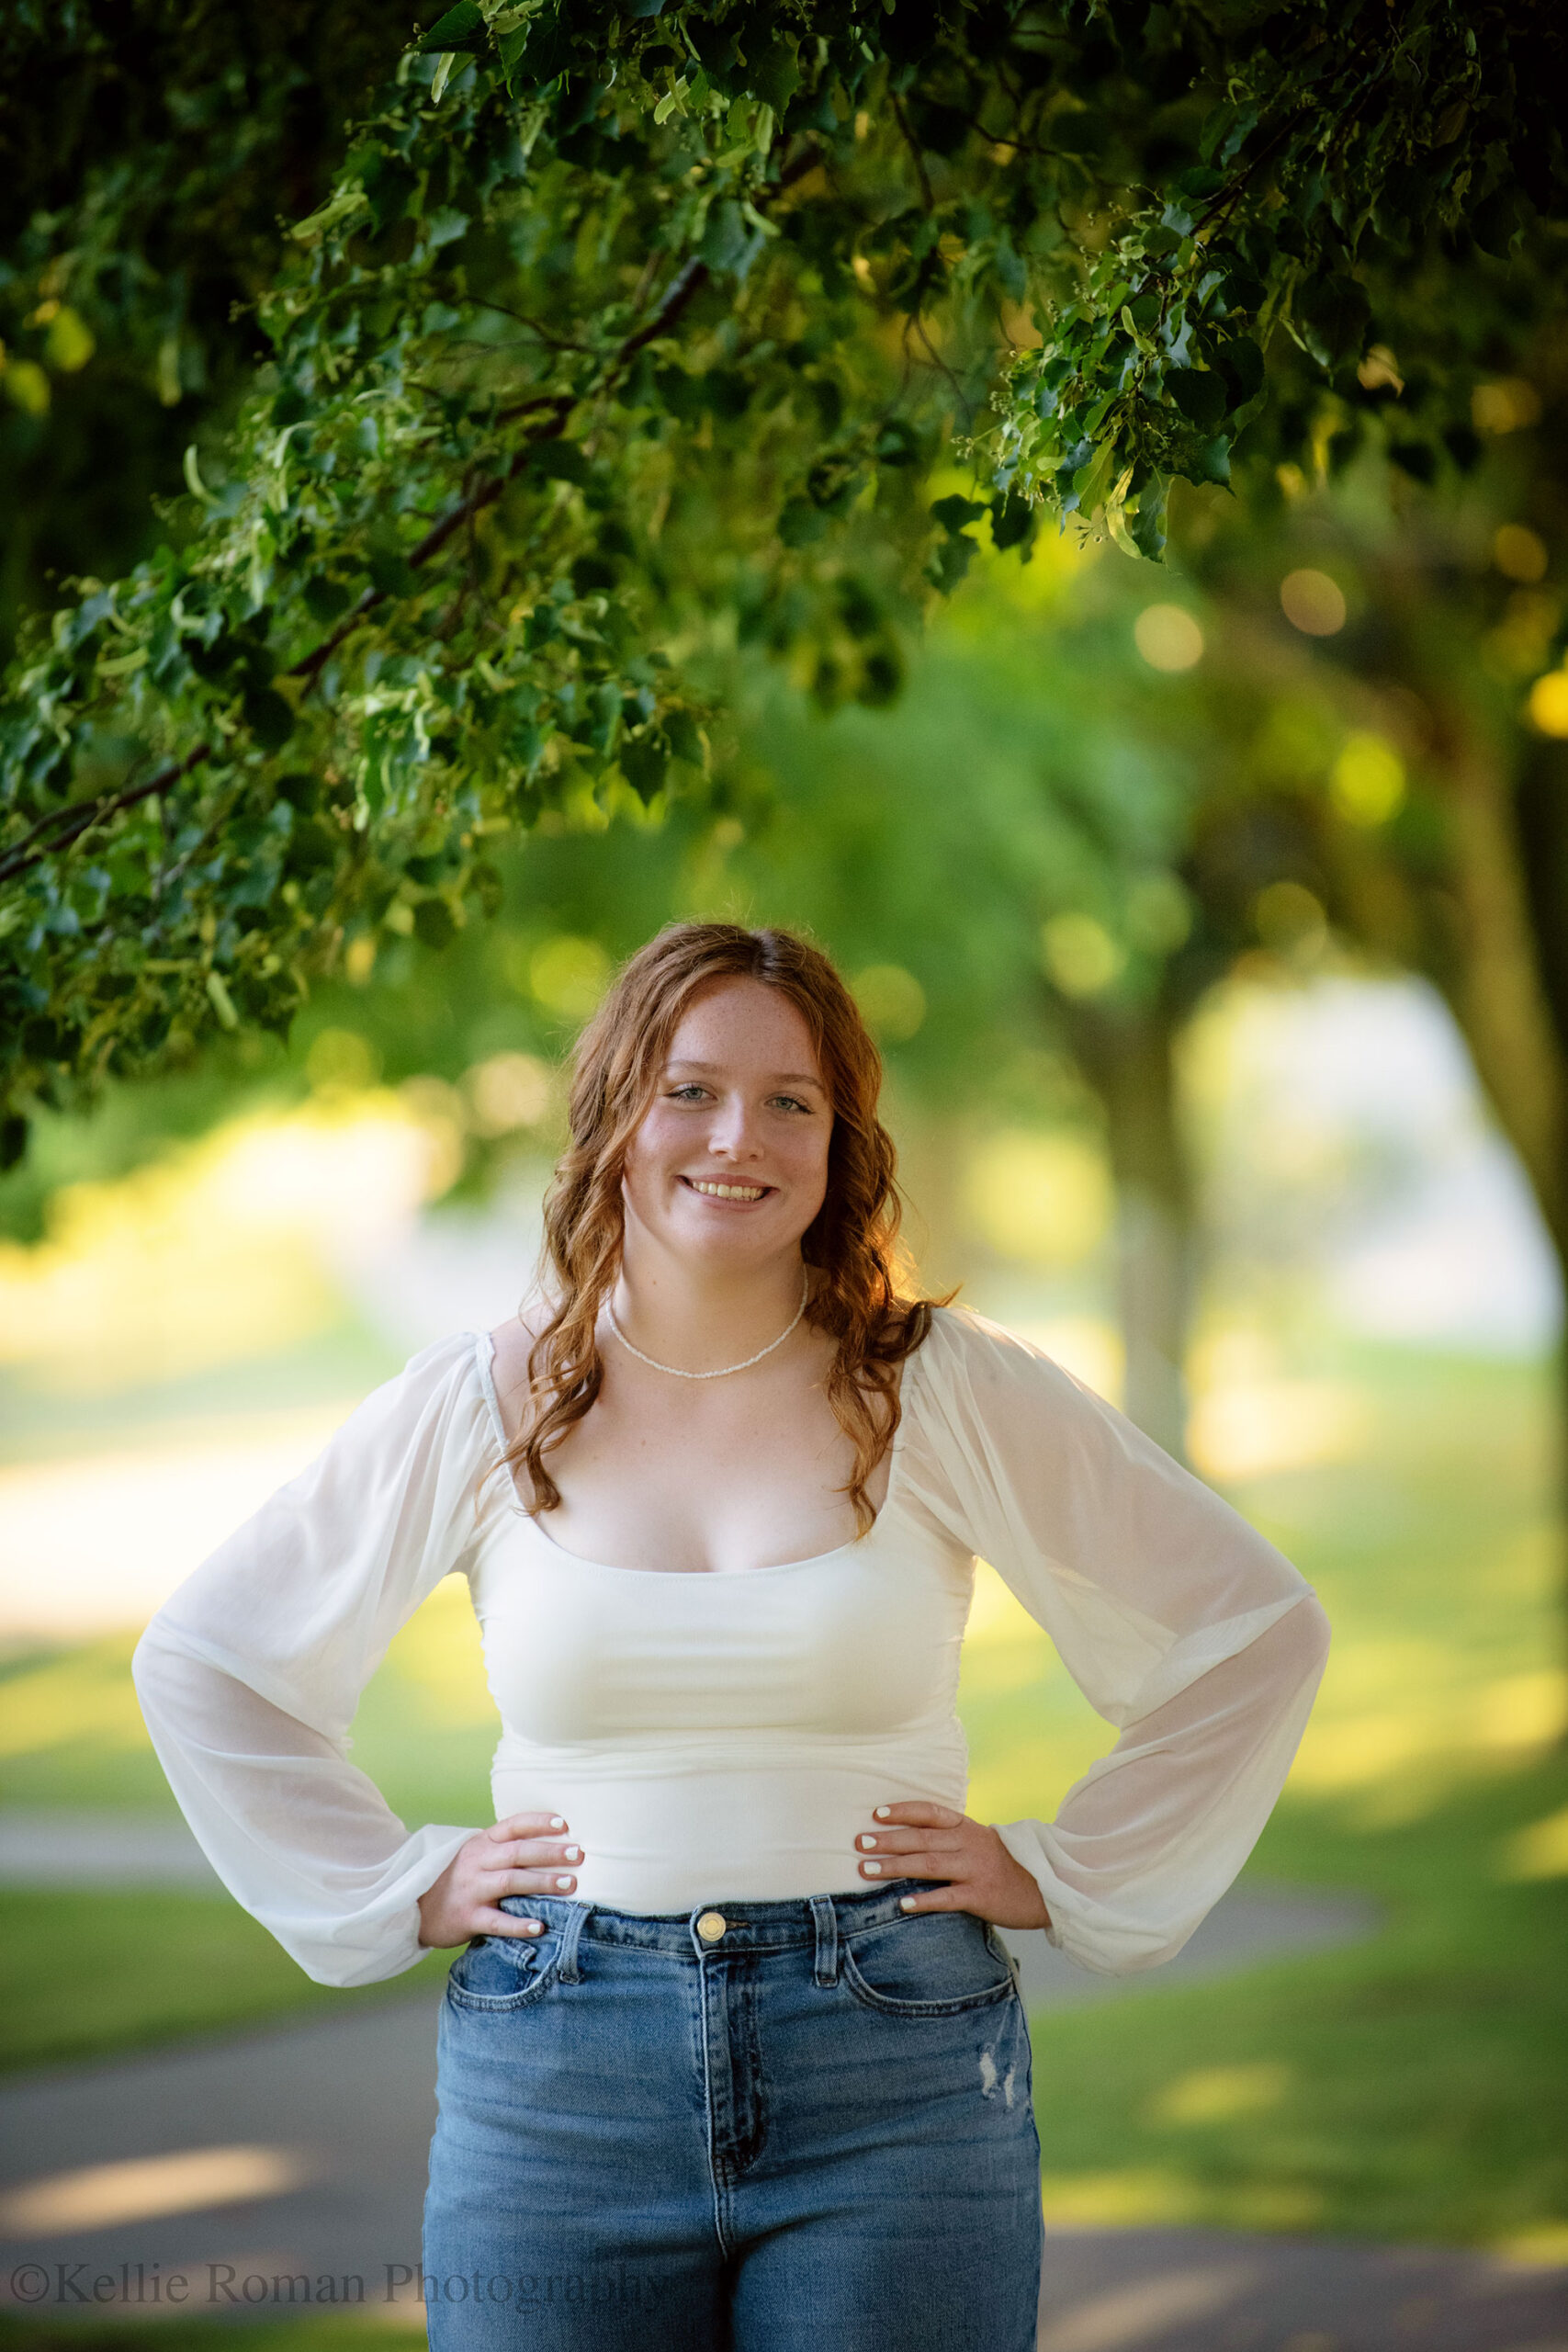 Oak Creek senior photography, high school senior girl standing in park with green trees behind her. she has jeans on and a white top. she's standing with her hands on her hips and smiling. her hair is curly, long, and red. 